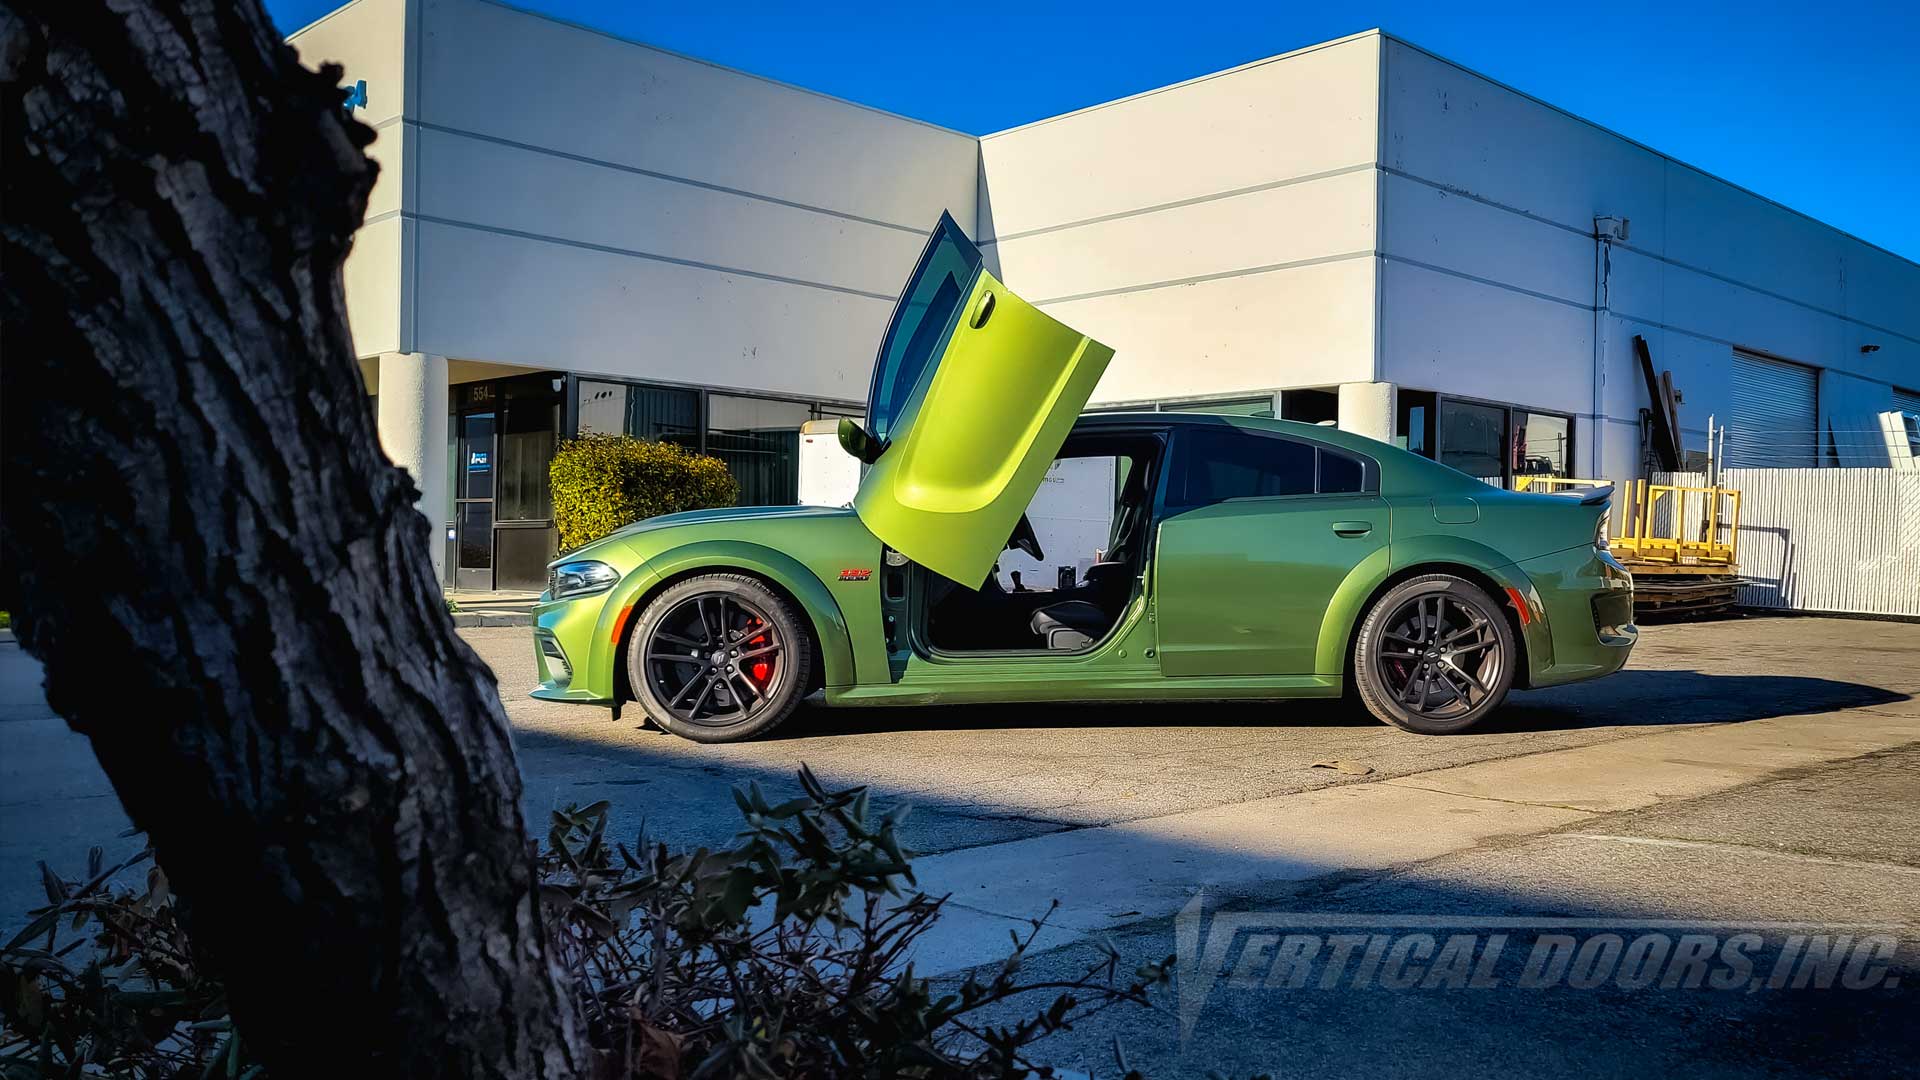 green lamborghini with butterfly doors